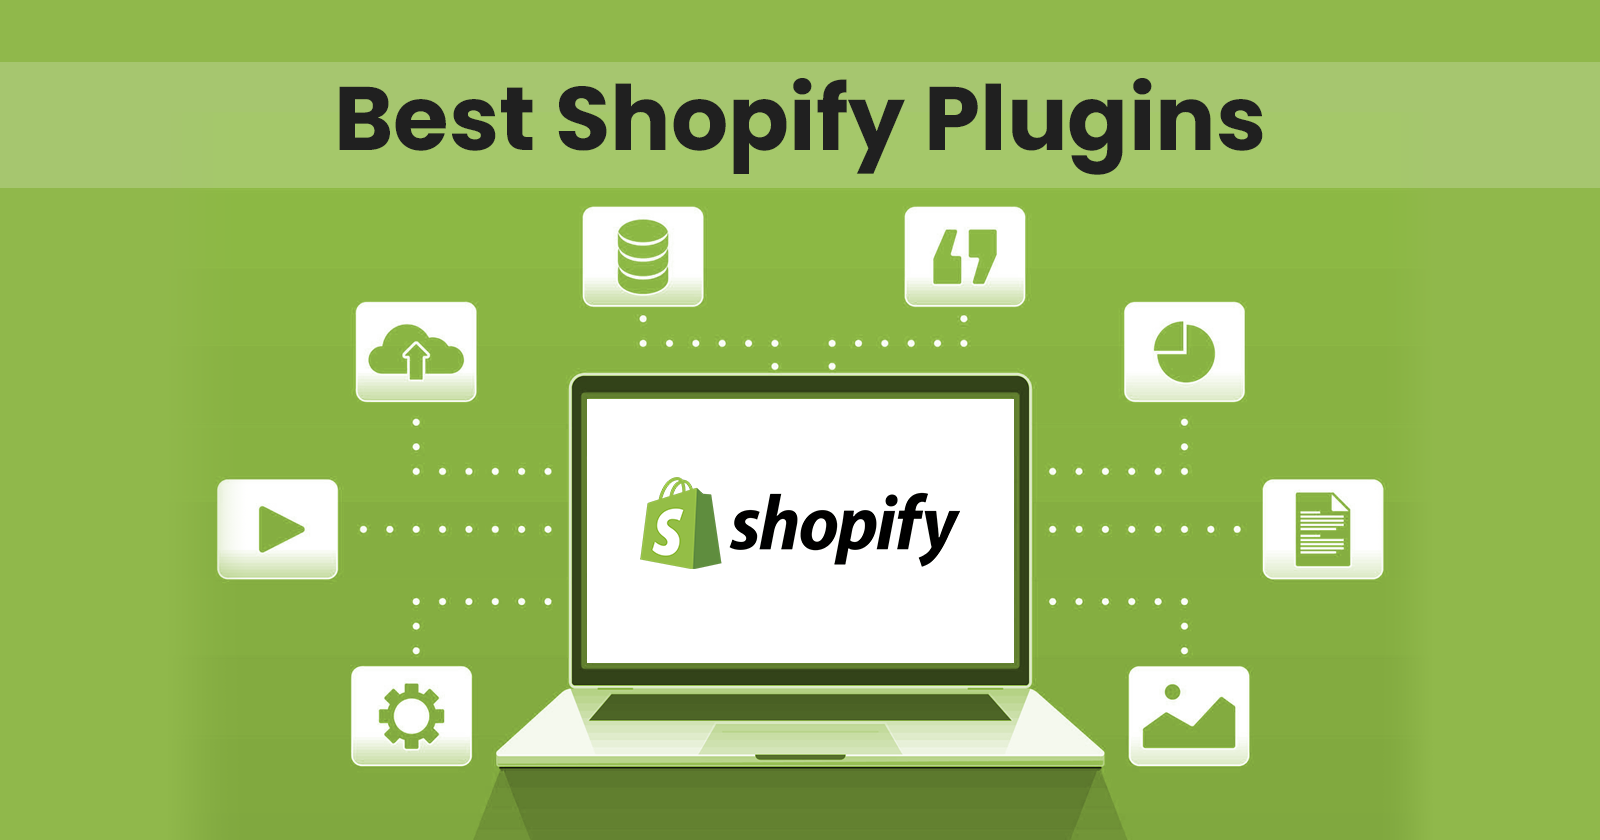 Best Shopify Plugins for Your Online Store